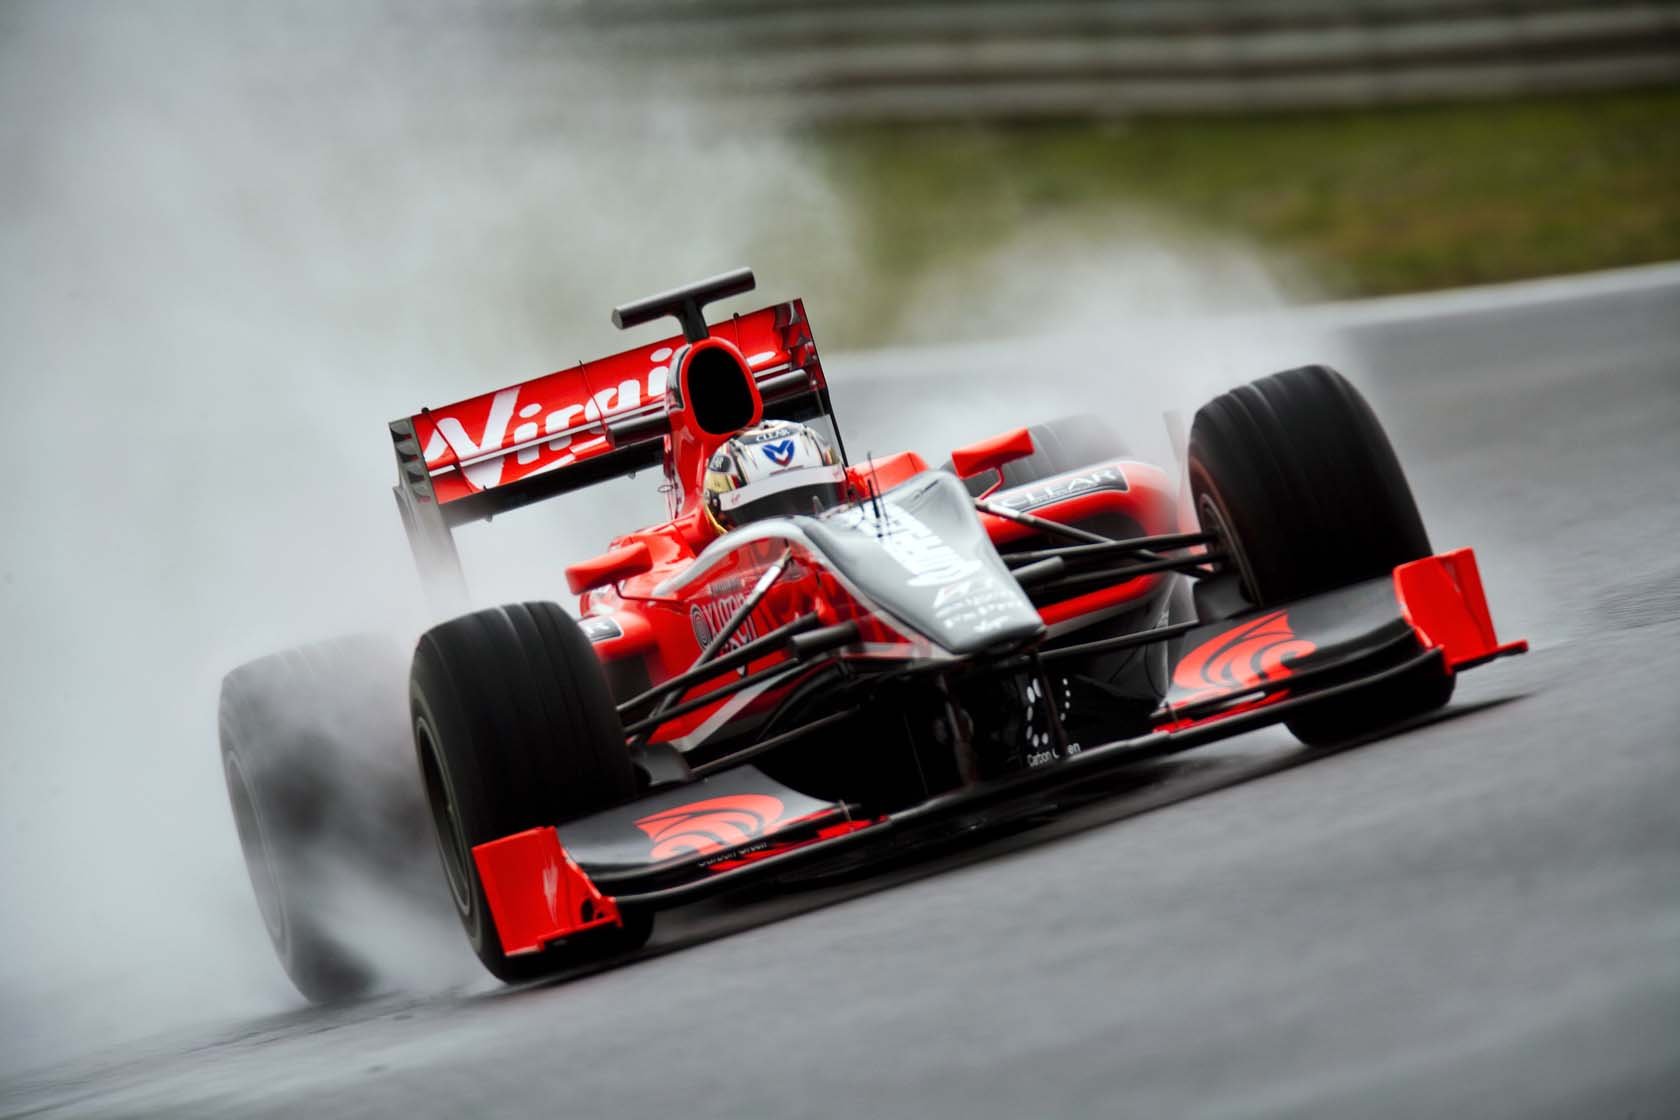 SJB Classic Article - Ex Marussia/Virgin F1 Cars For Sale